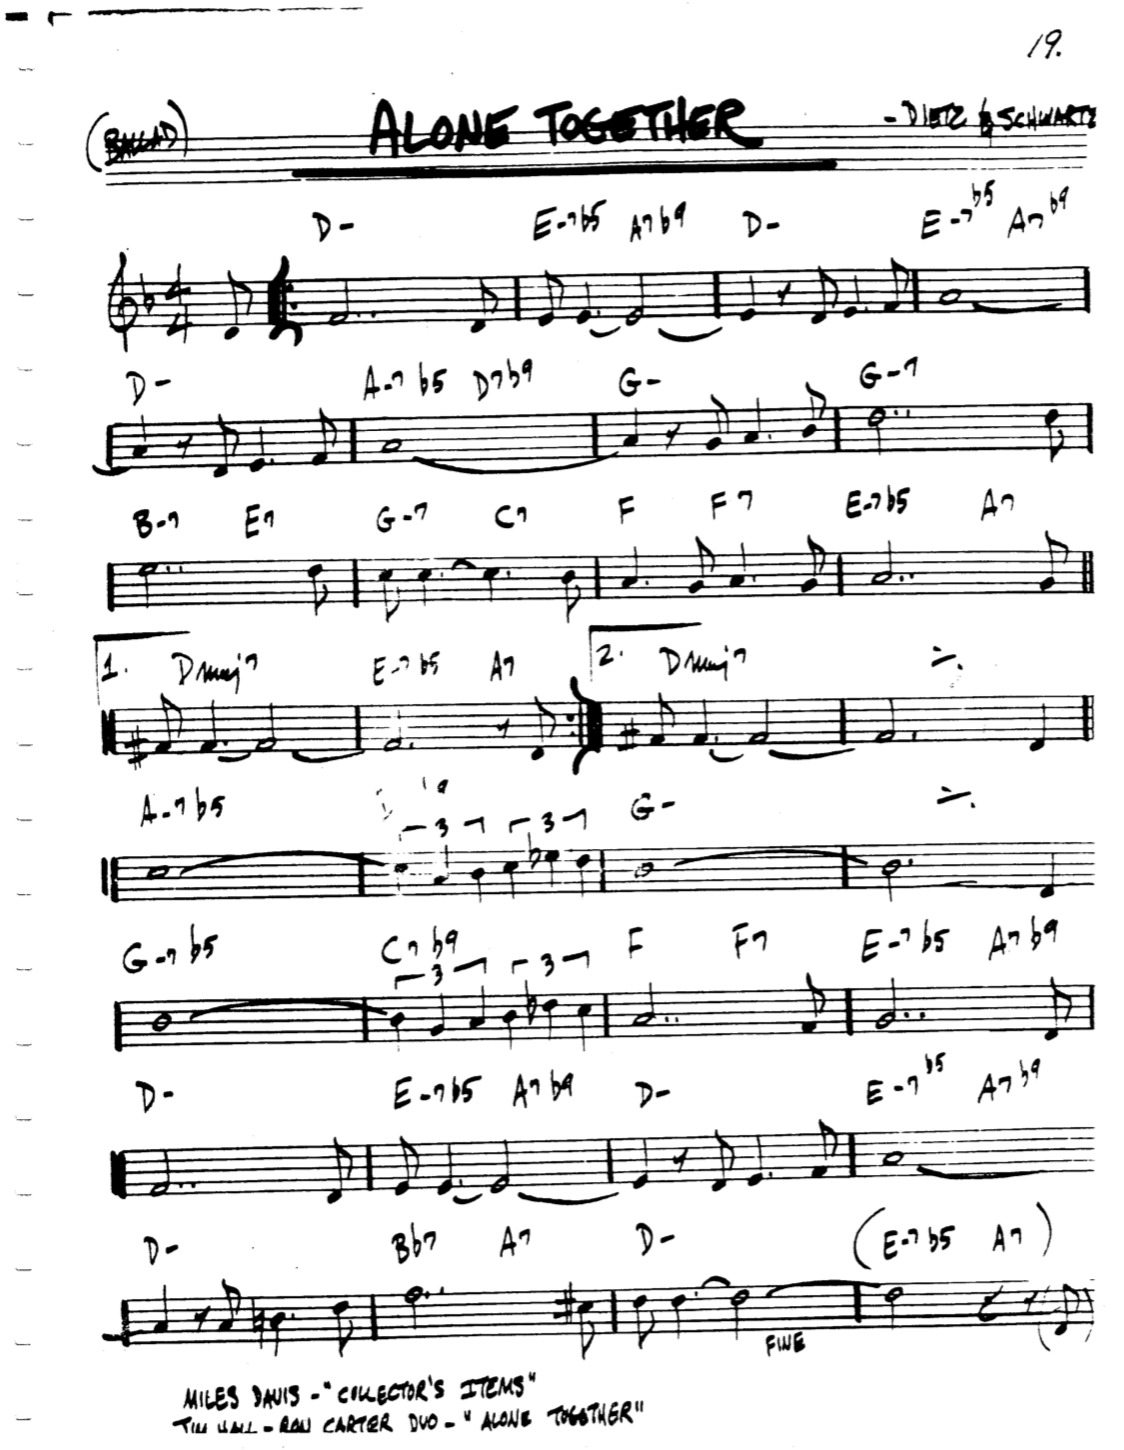 Alone Together Lead Sheet